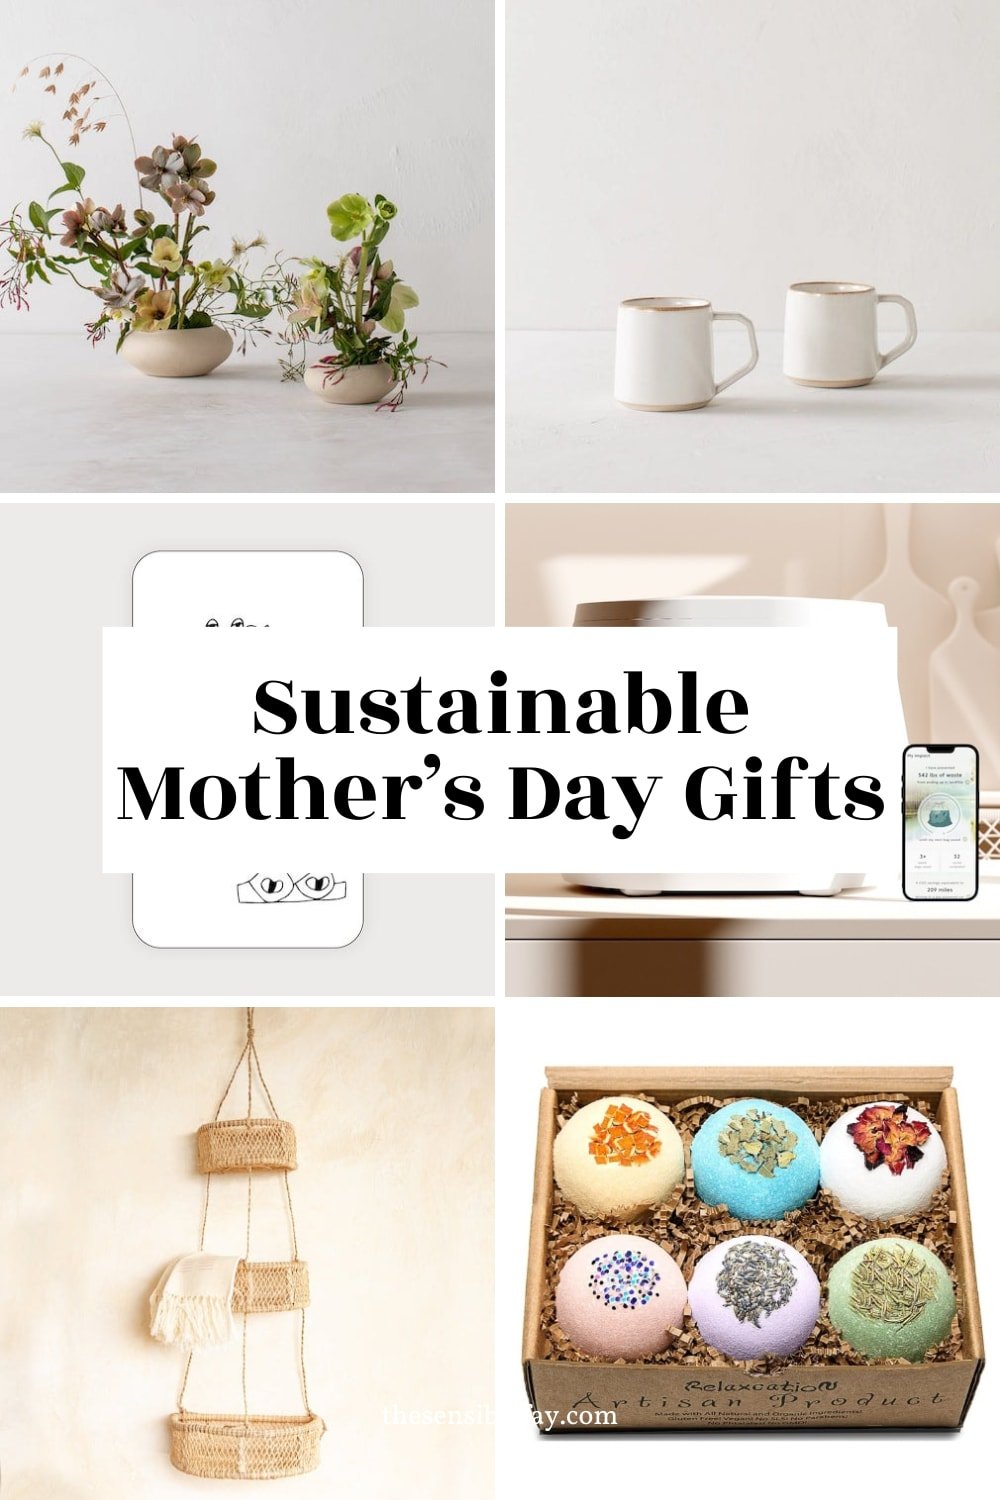 Sustainable Mother's Day Gifts Pin.jpg